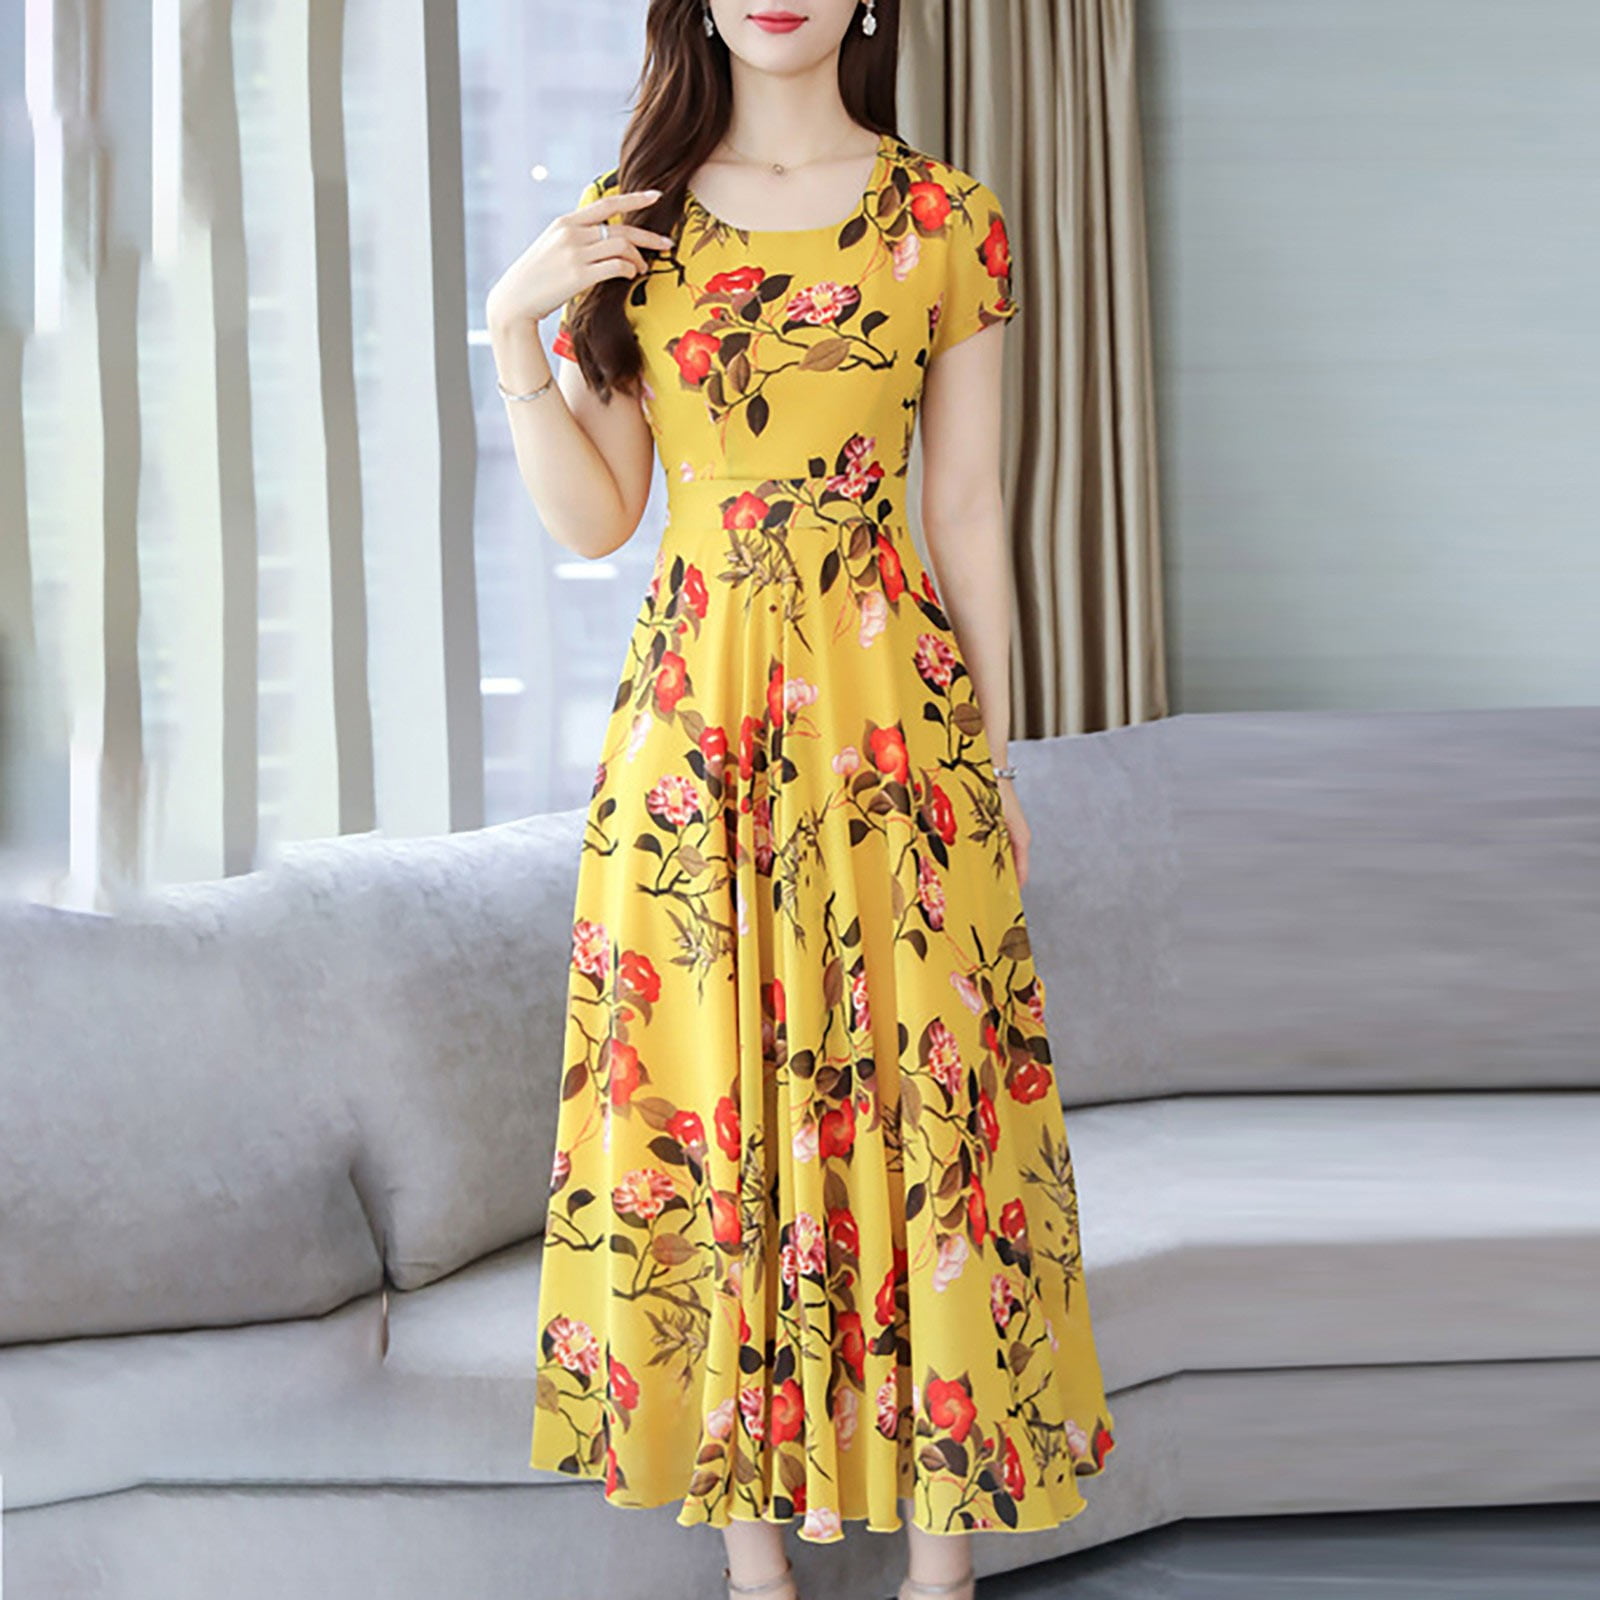 Share more than 148 pleated a line dress latest